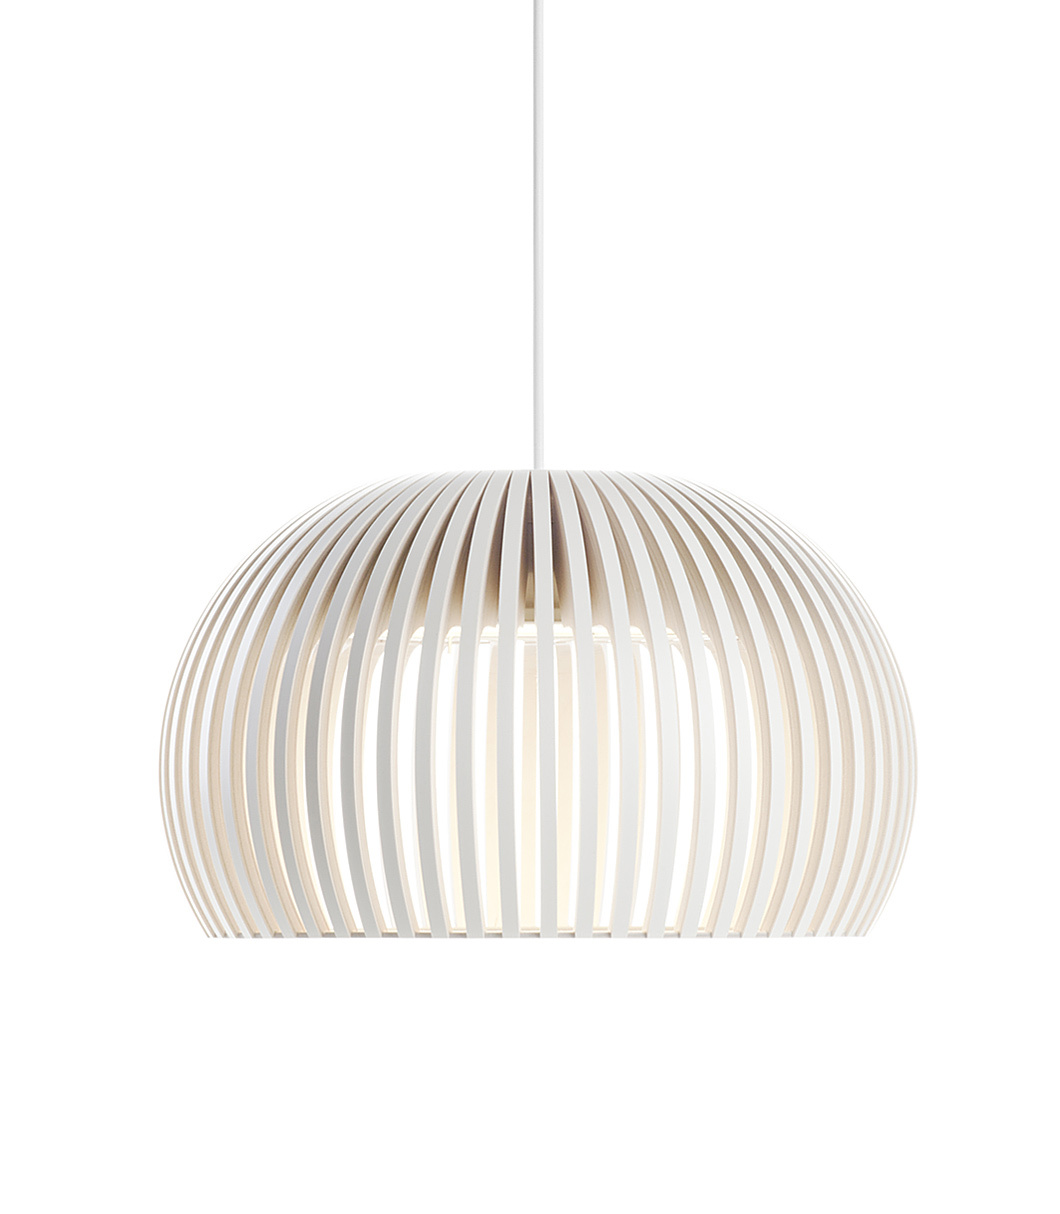 Atto 5000 pendant lamp is available in white laminated